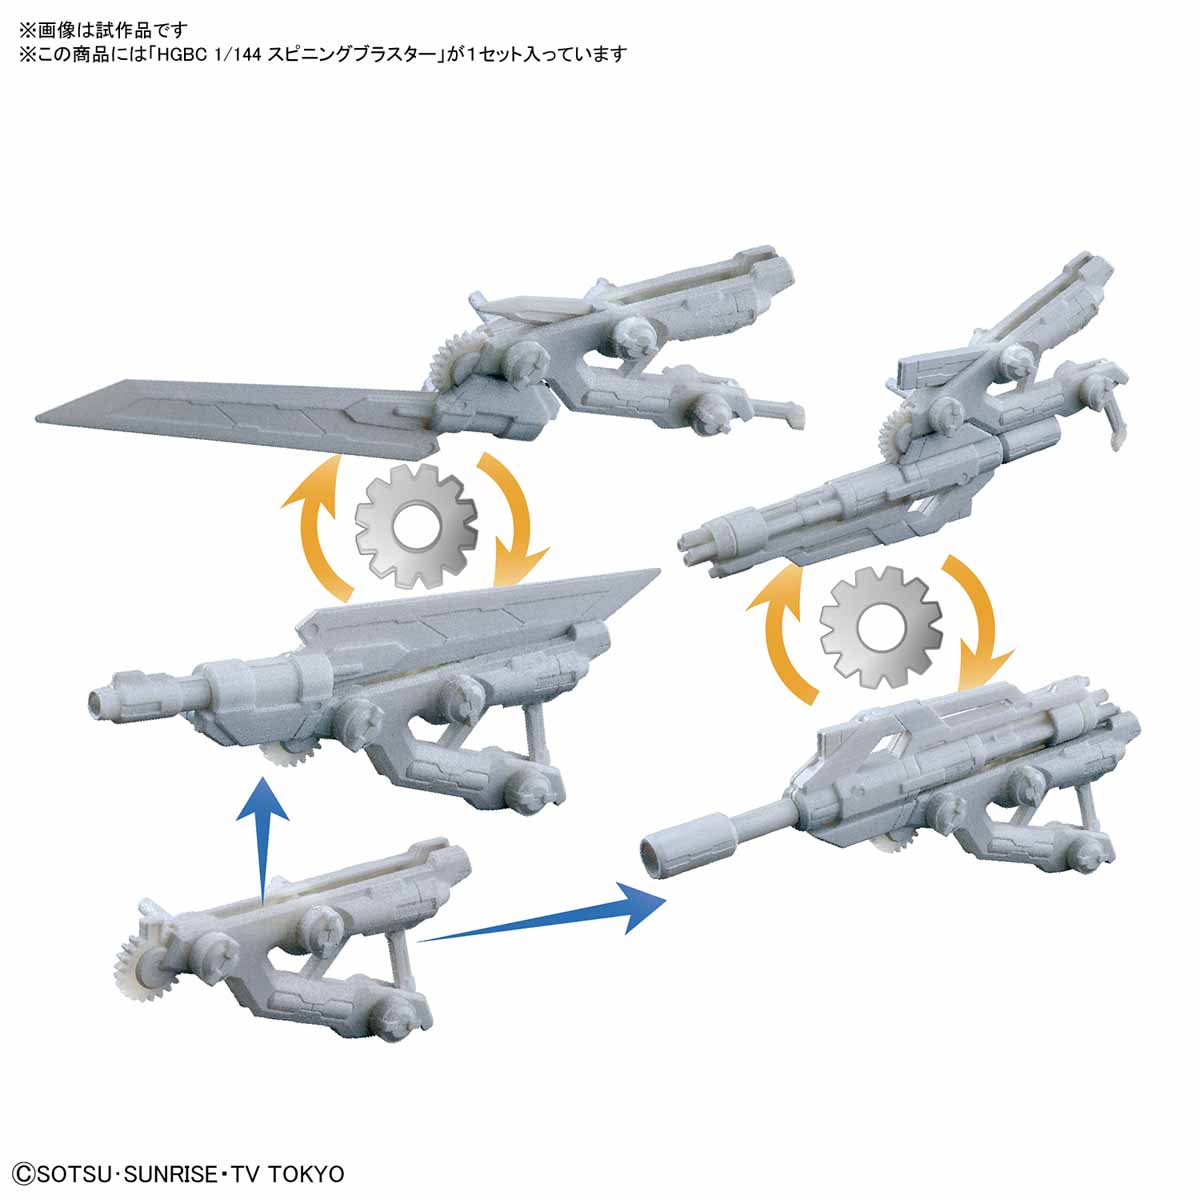 HGBC 1/144 Spinning Blaster - Release Info - Gundam Kits Collection News and Reviews